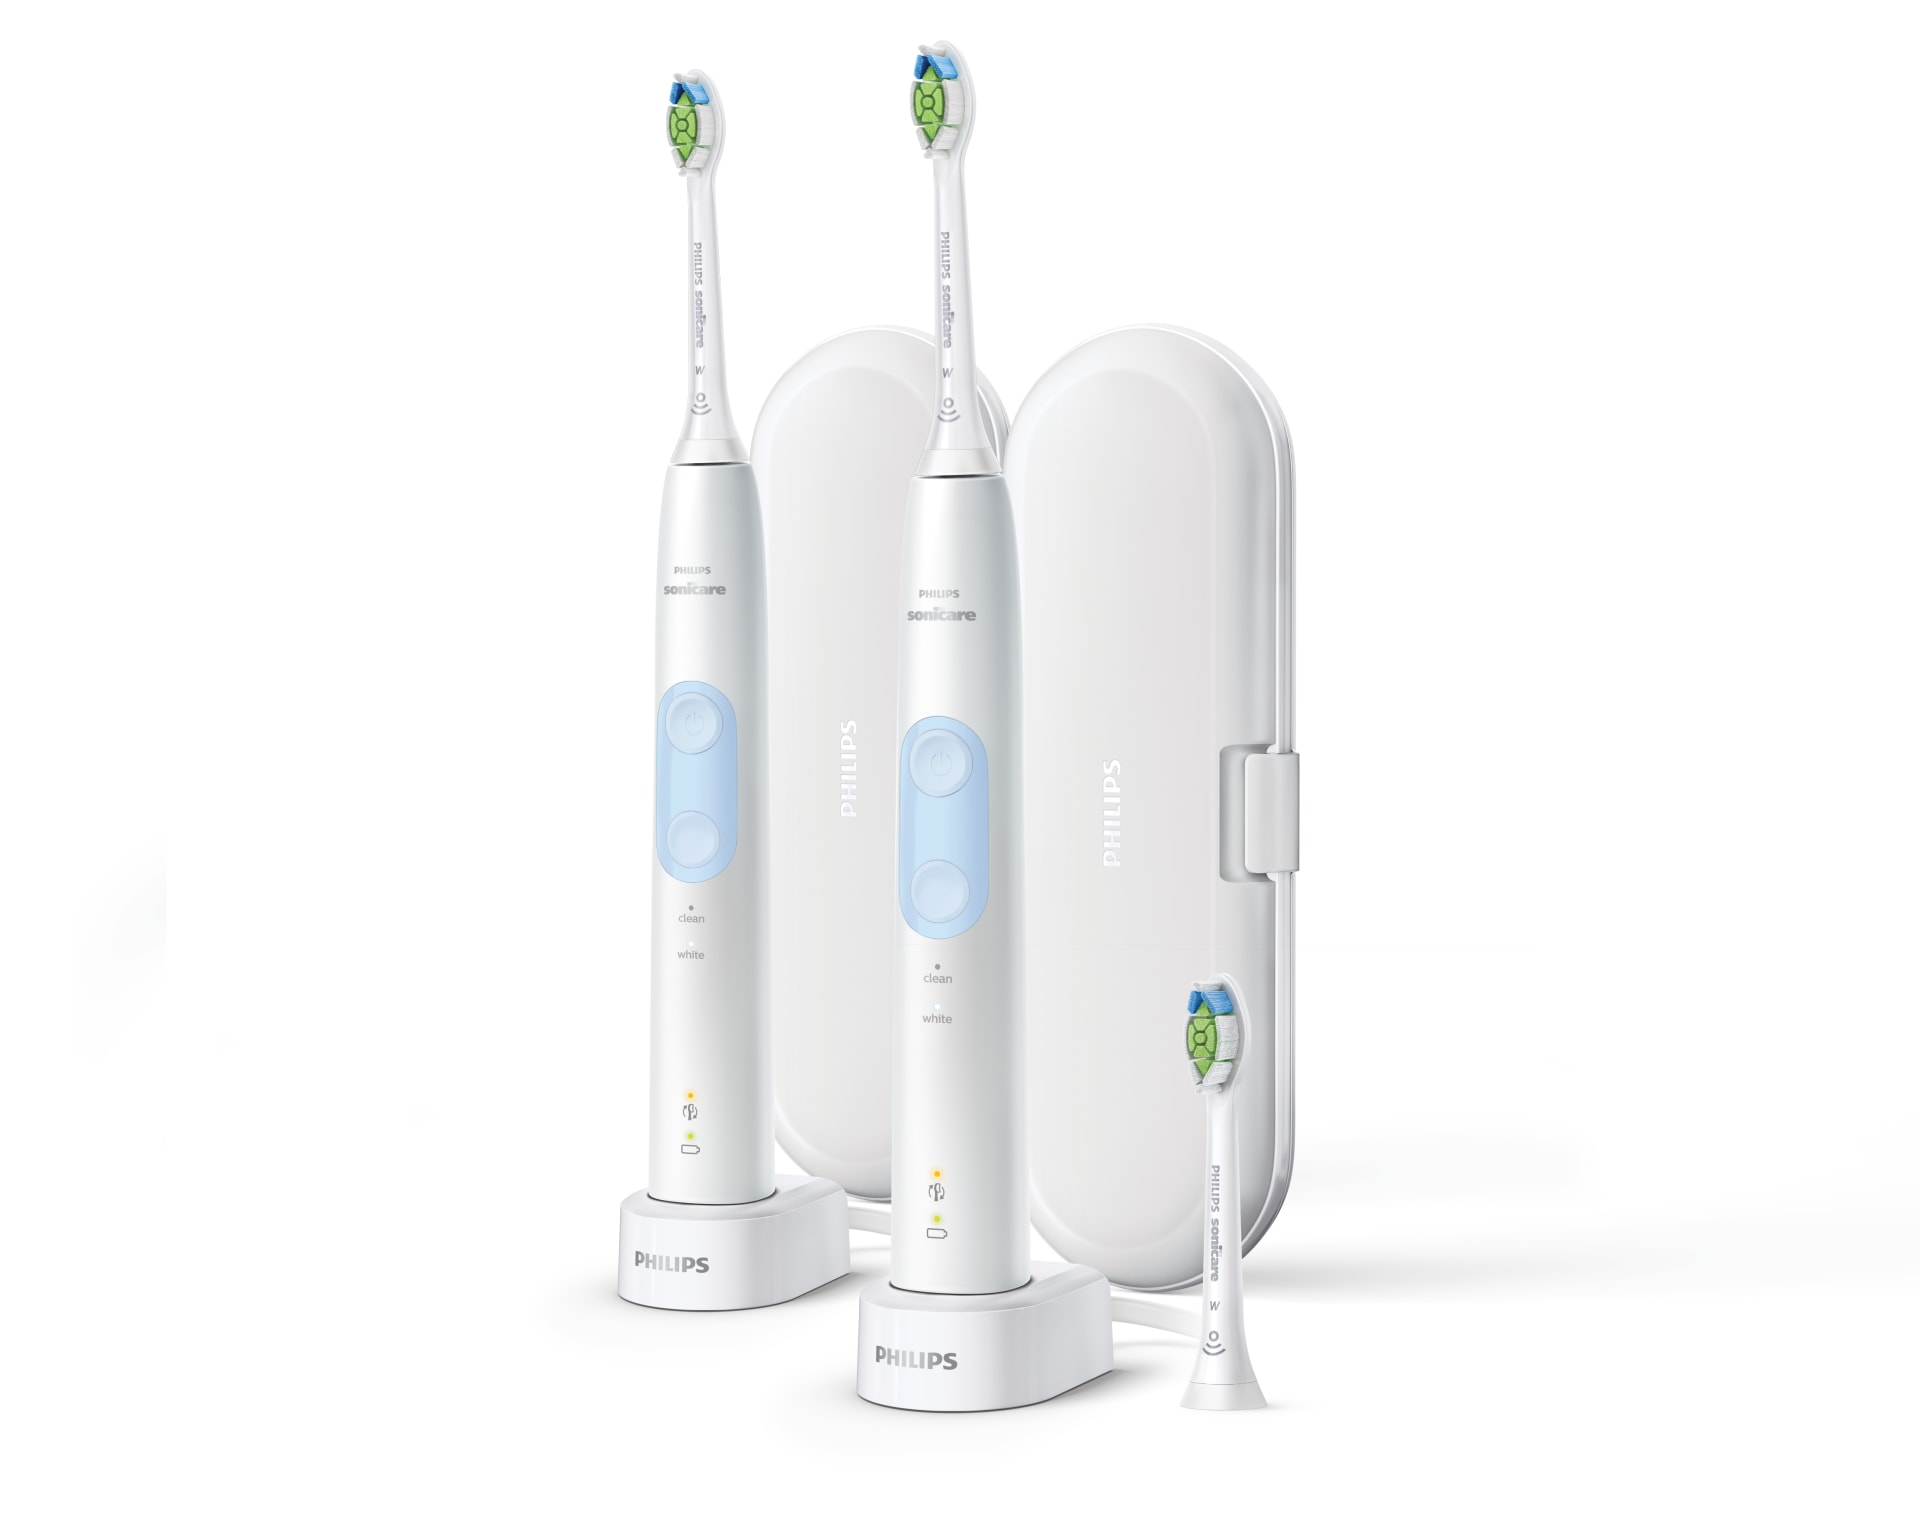 Philips Sonicare Optimal Clean Rechargeable Toothbrush, 2-pack $69.99 @ Costco